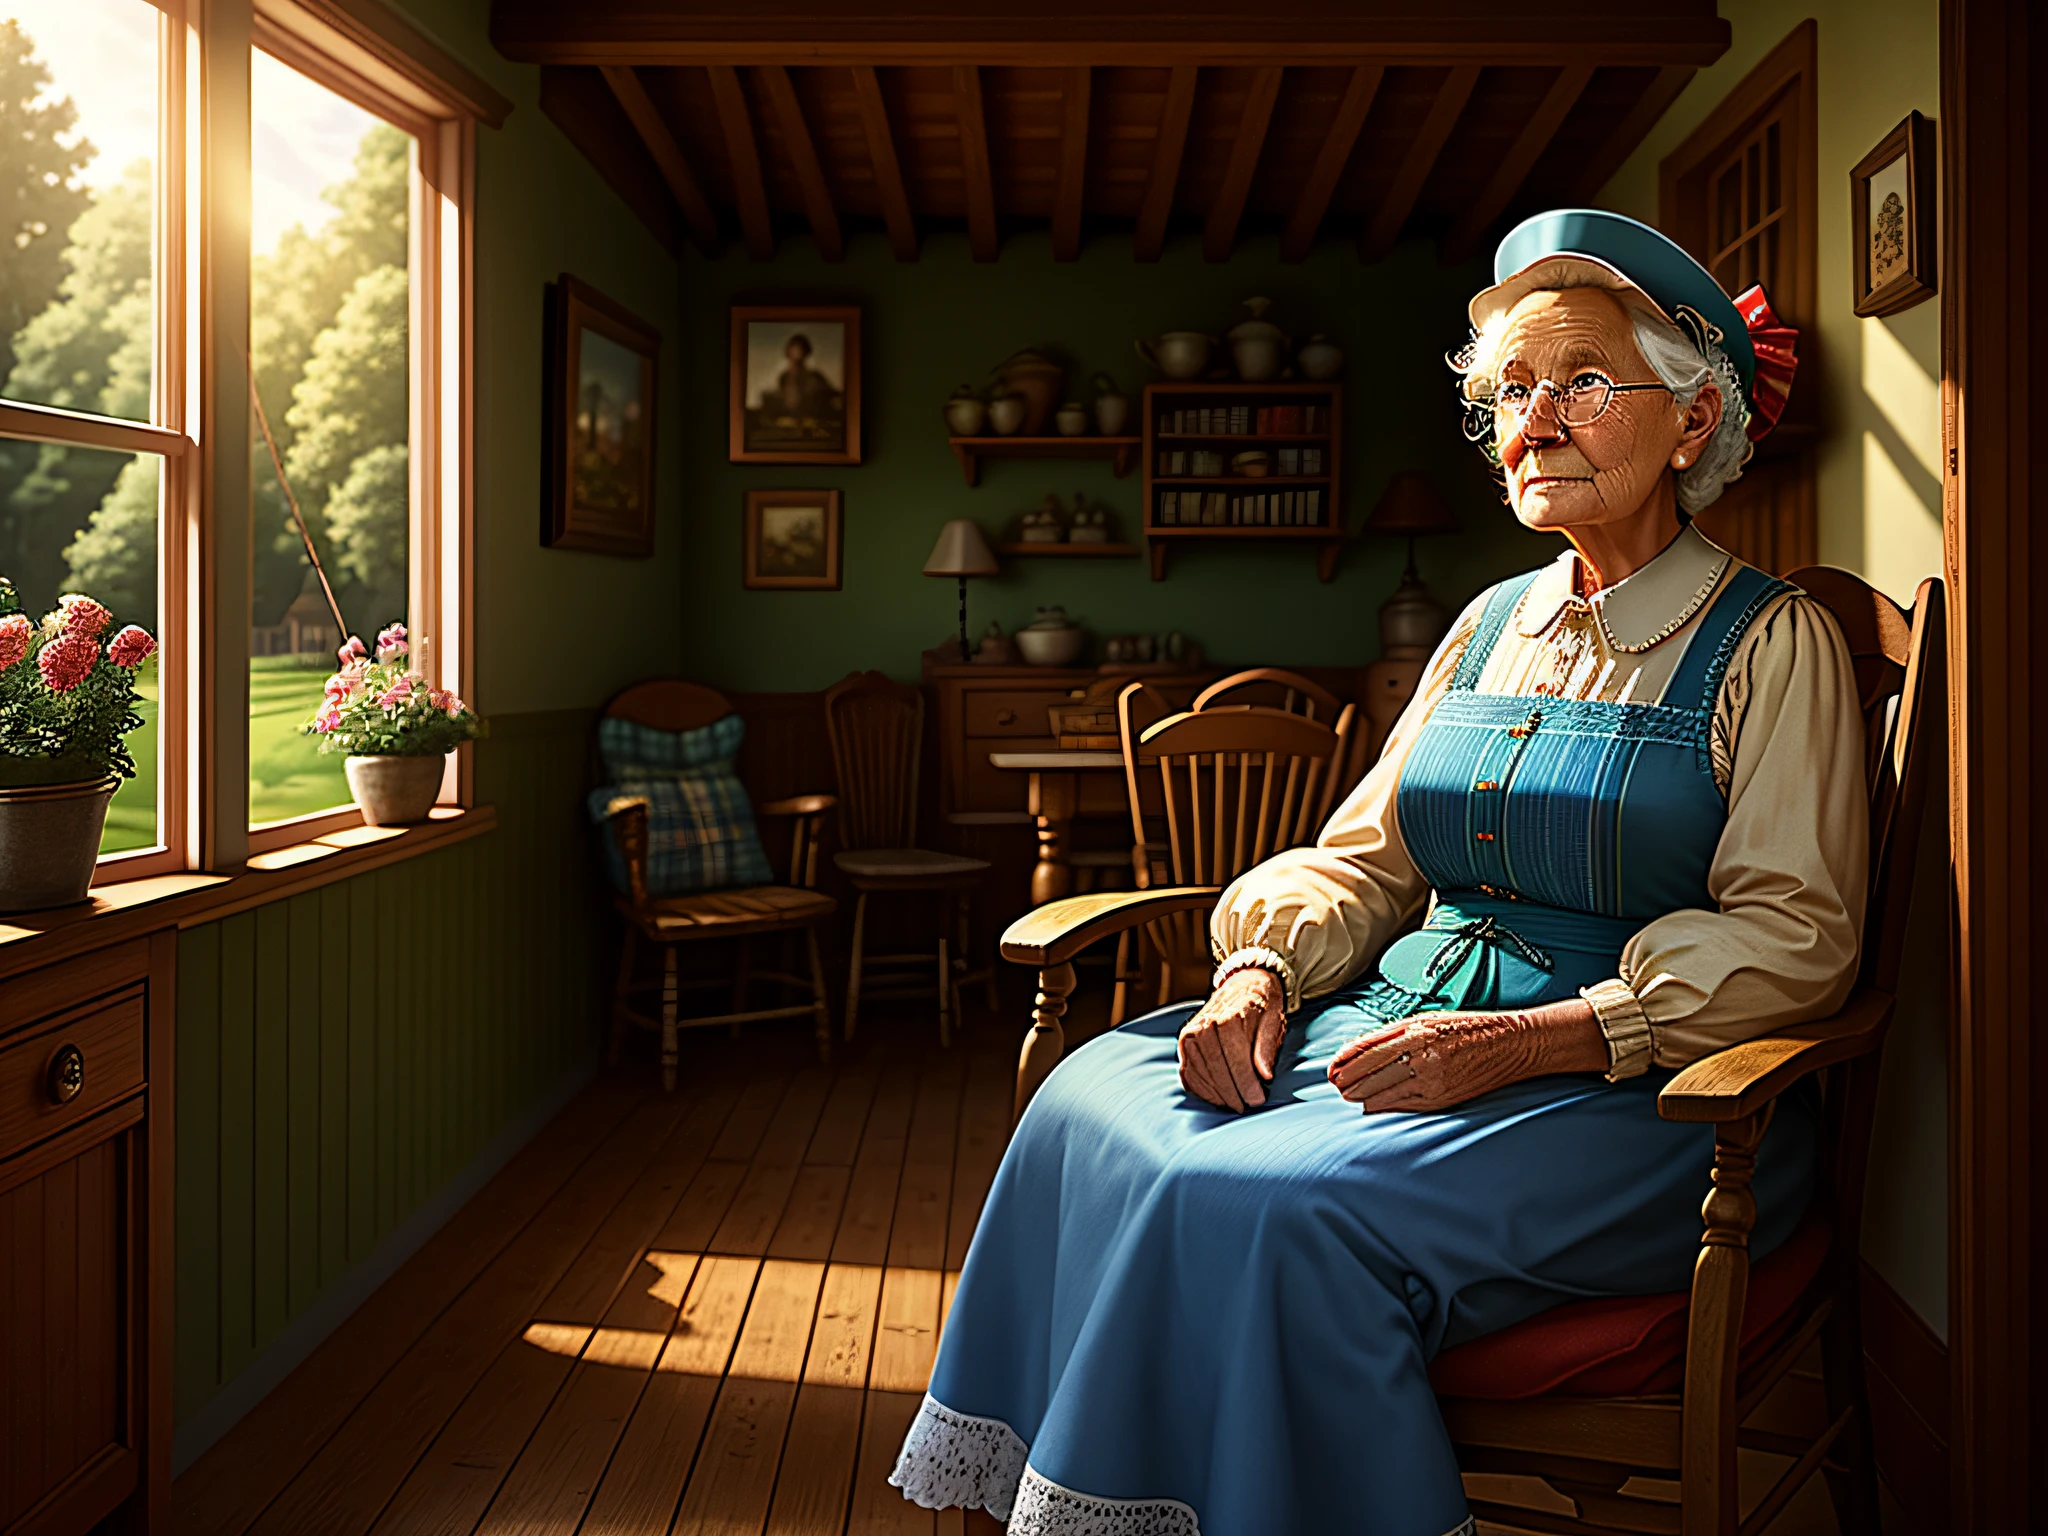 High quality, nostalgic country house scene with detailed interior. Grandmother sitting on the porch, affectionate facial expressions, little light